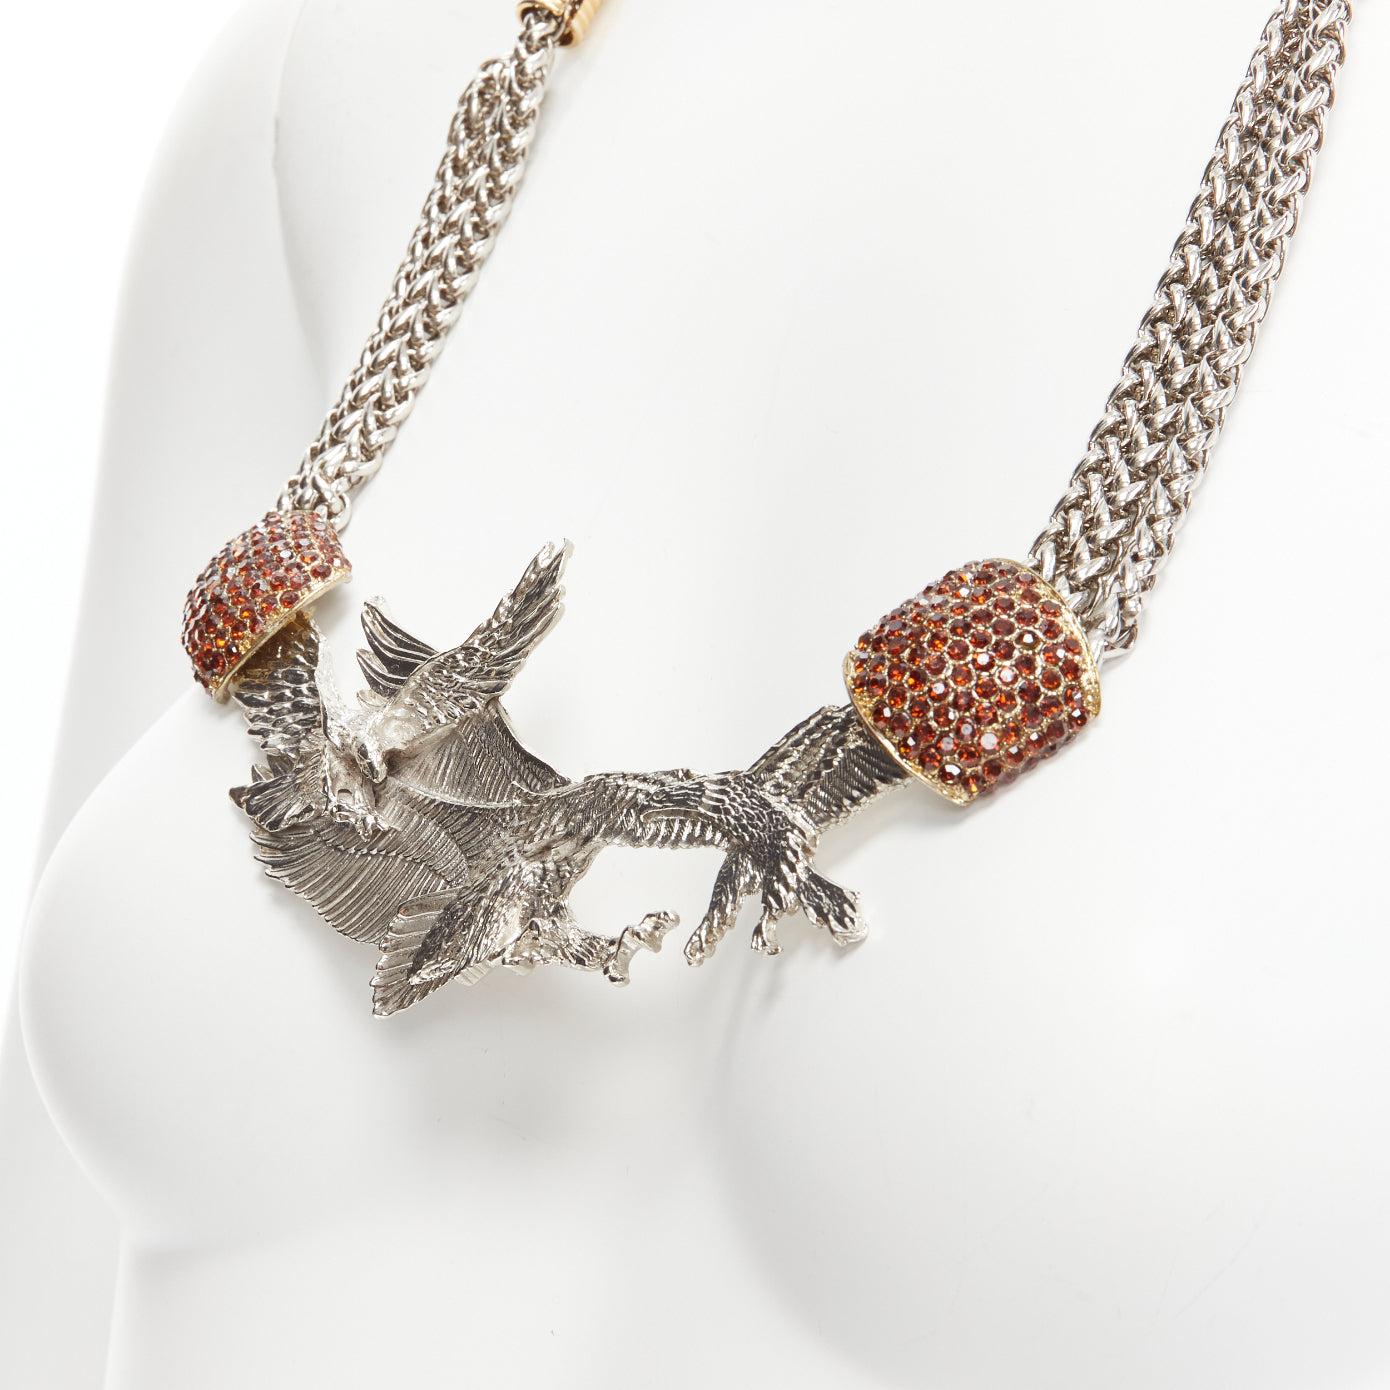 TOGA ARCHIVES silver Eagles red crystal studs chain short necklace
Reference: BSHW/A00061
Brand: Toga Archives
Material: Metal
Color: Silver, Red
Pattern: Animal Print
Closure: Lobster Clasp
Lining: Silver Metal
Extra Details: Back